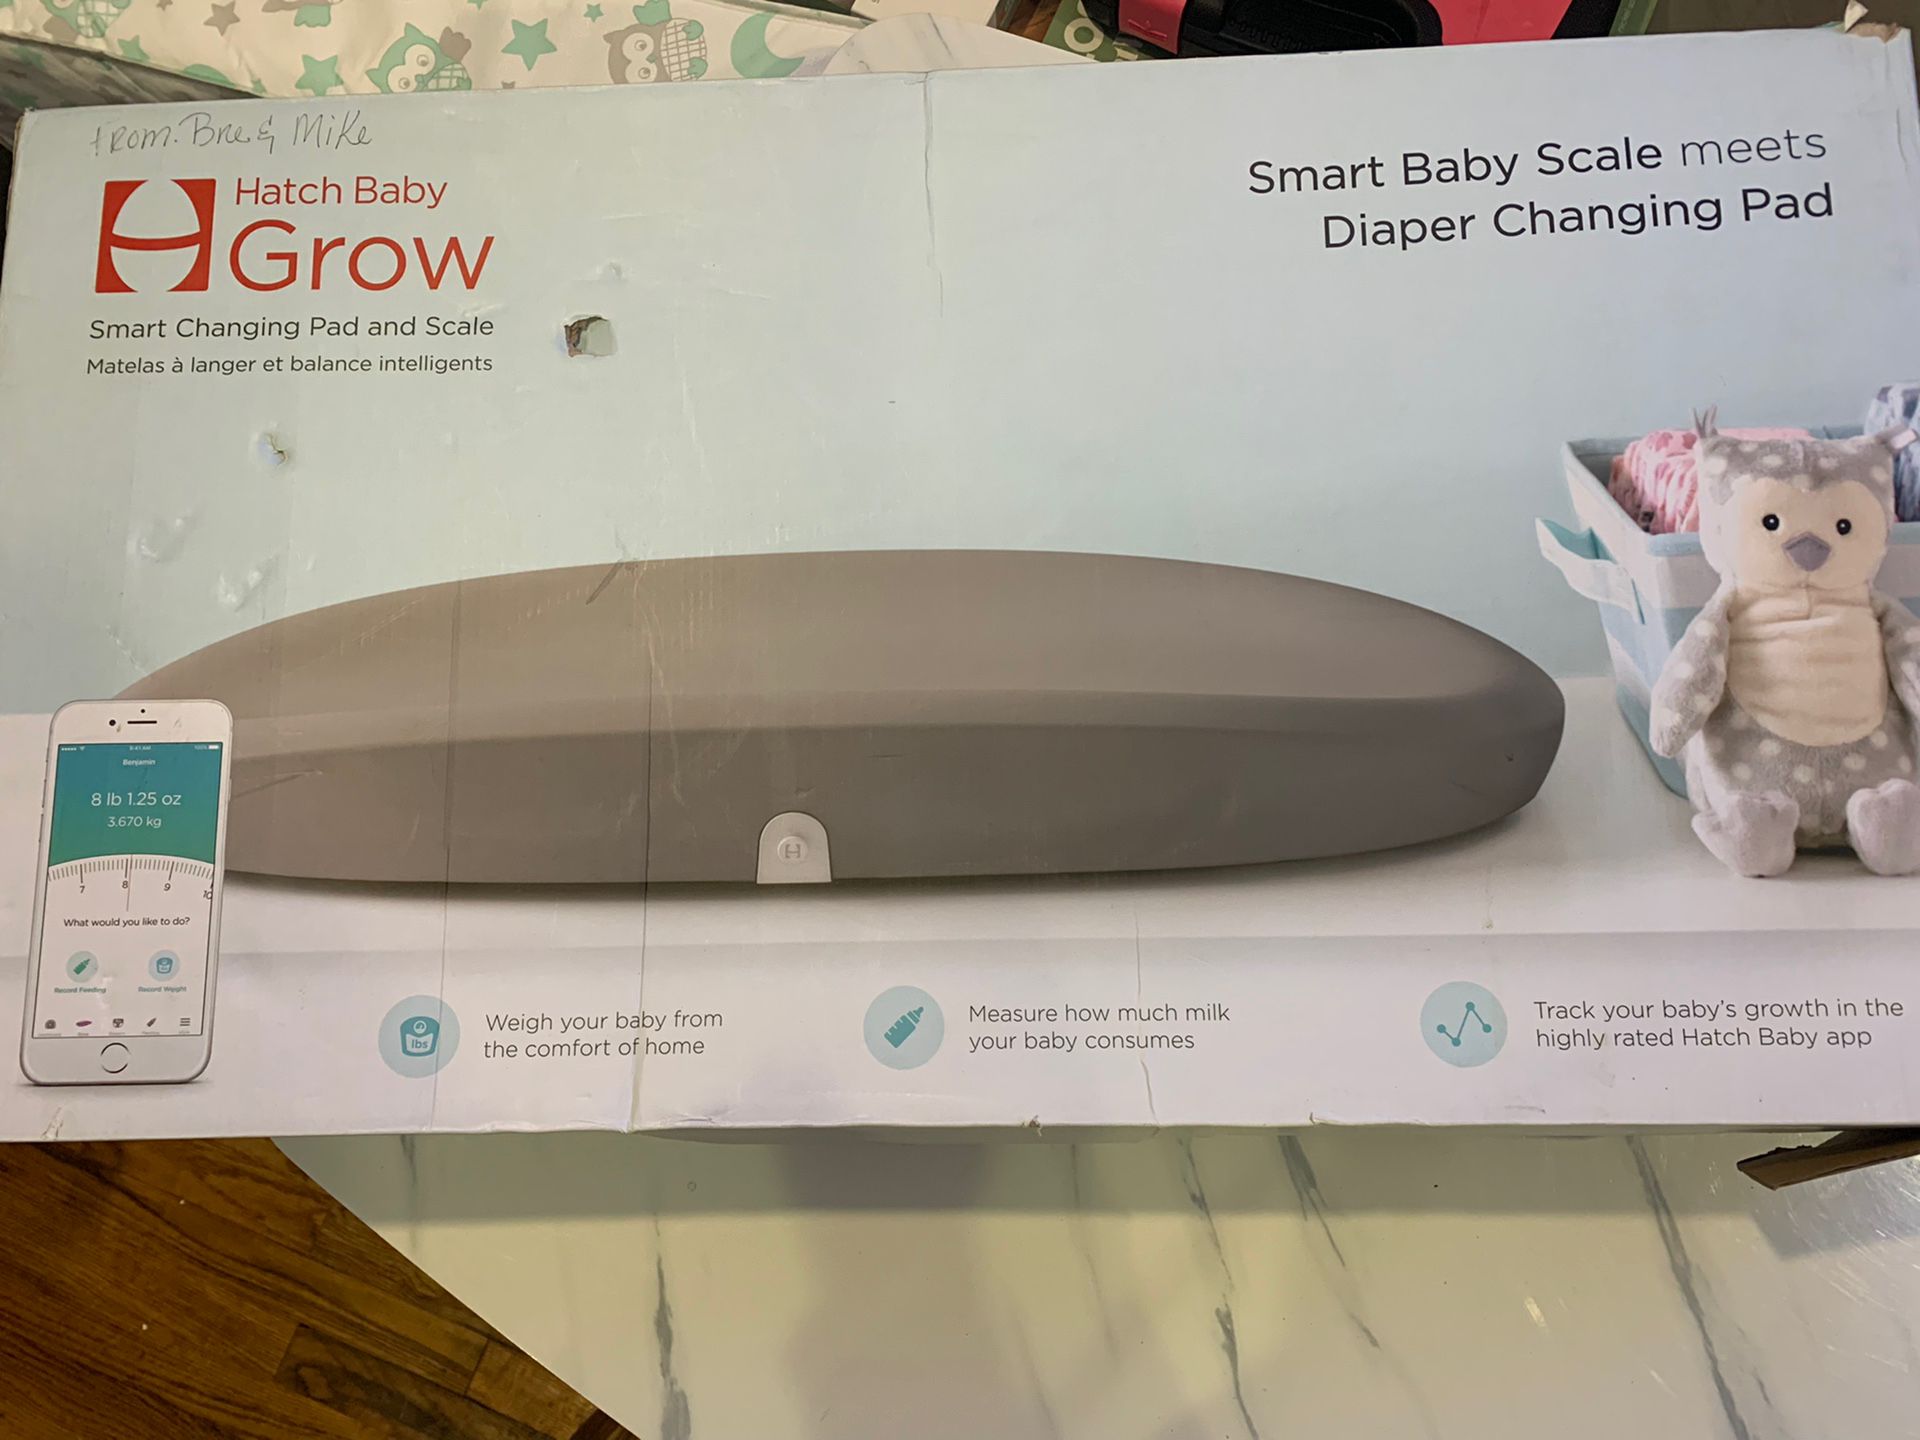 Hatch Baby Grow Smart Scale & Diaper Changing Pad